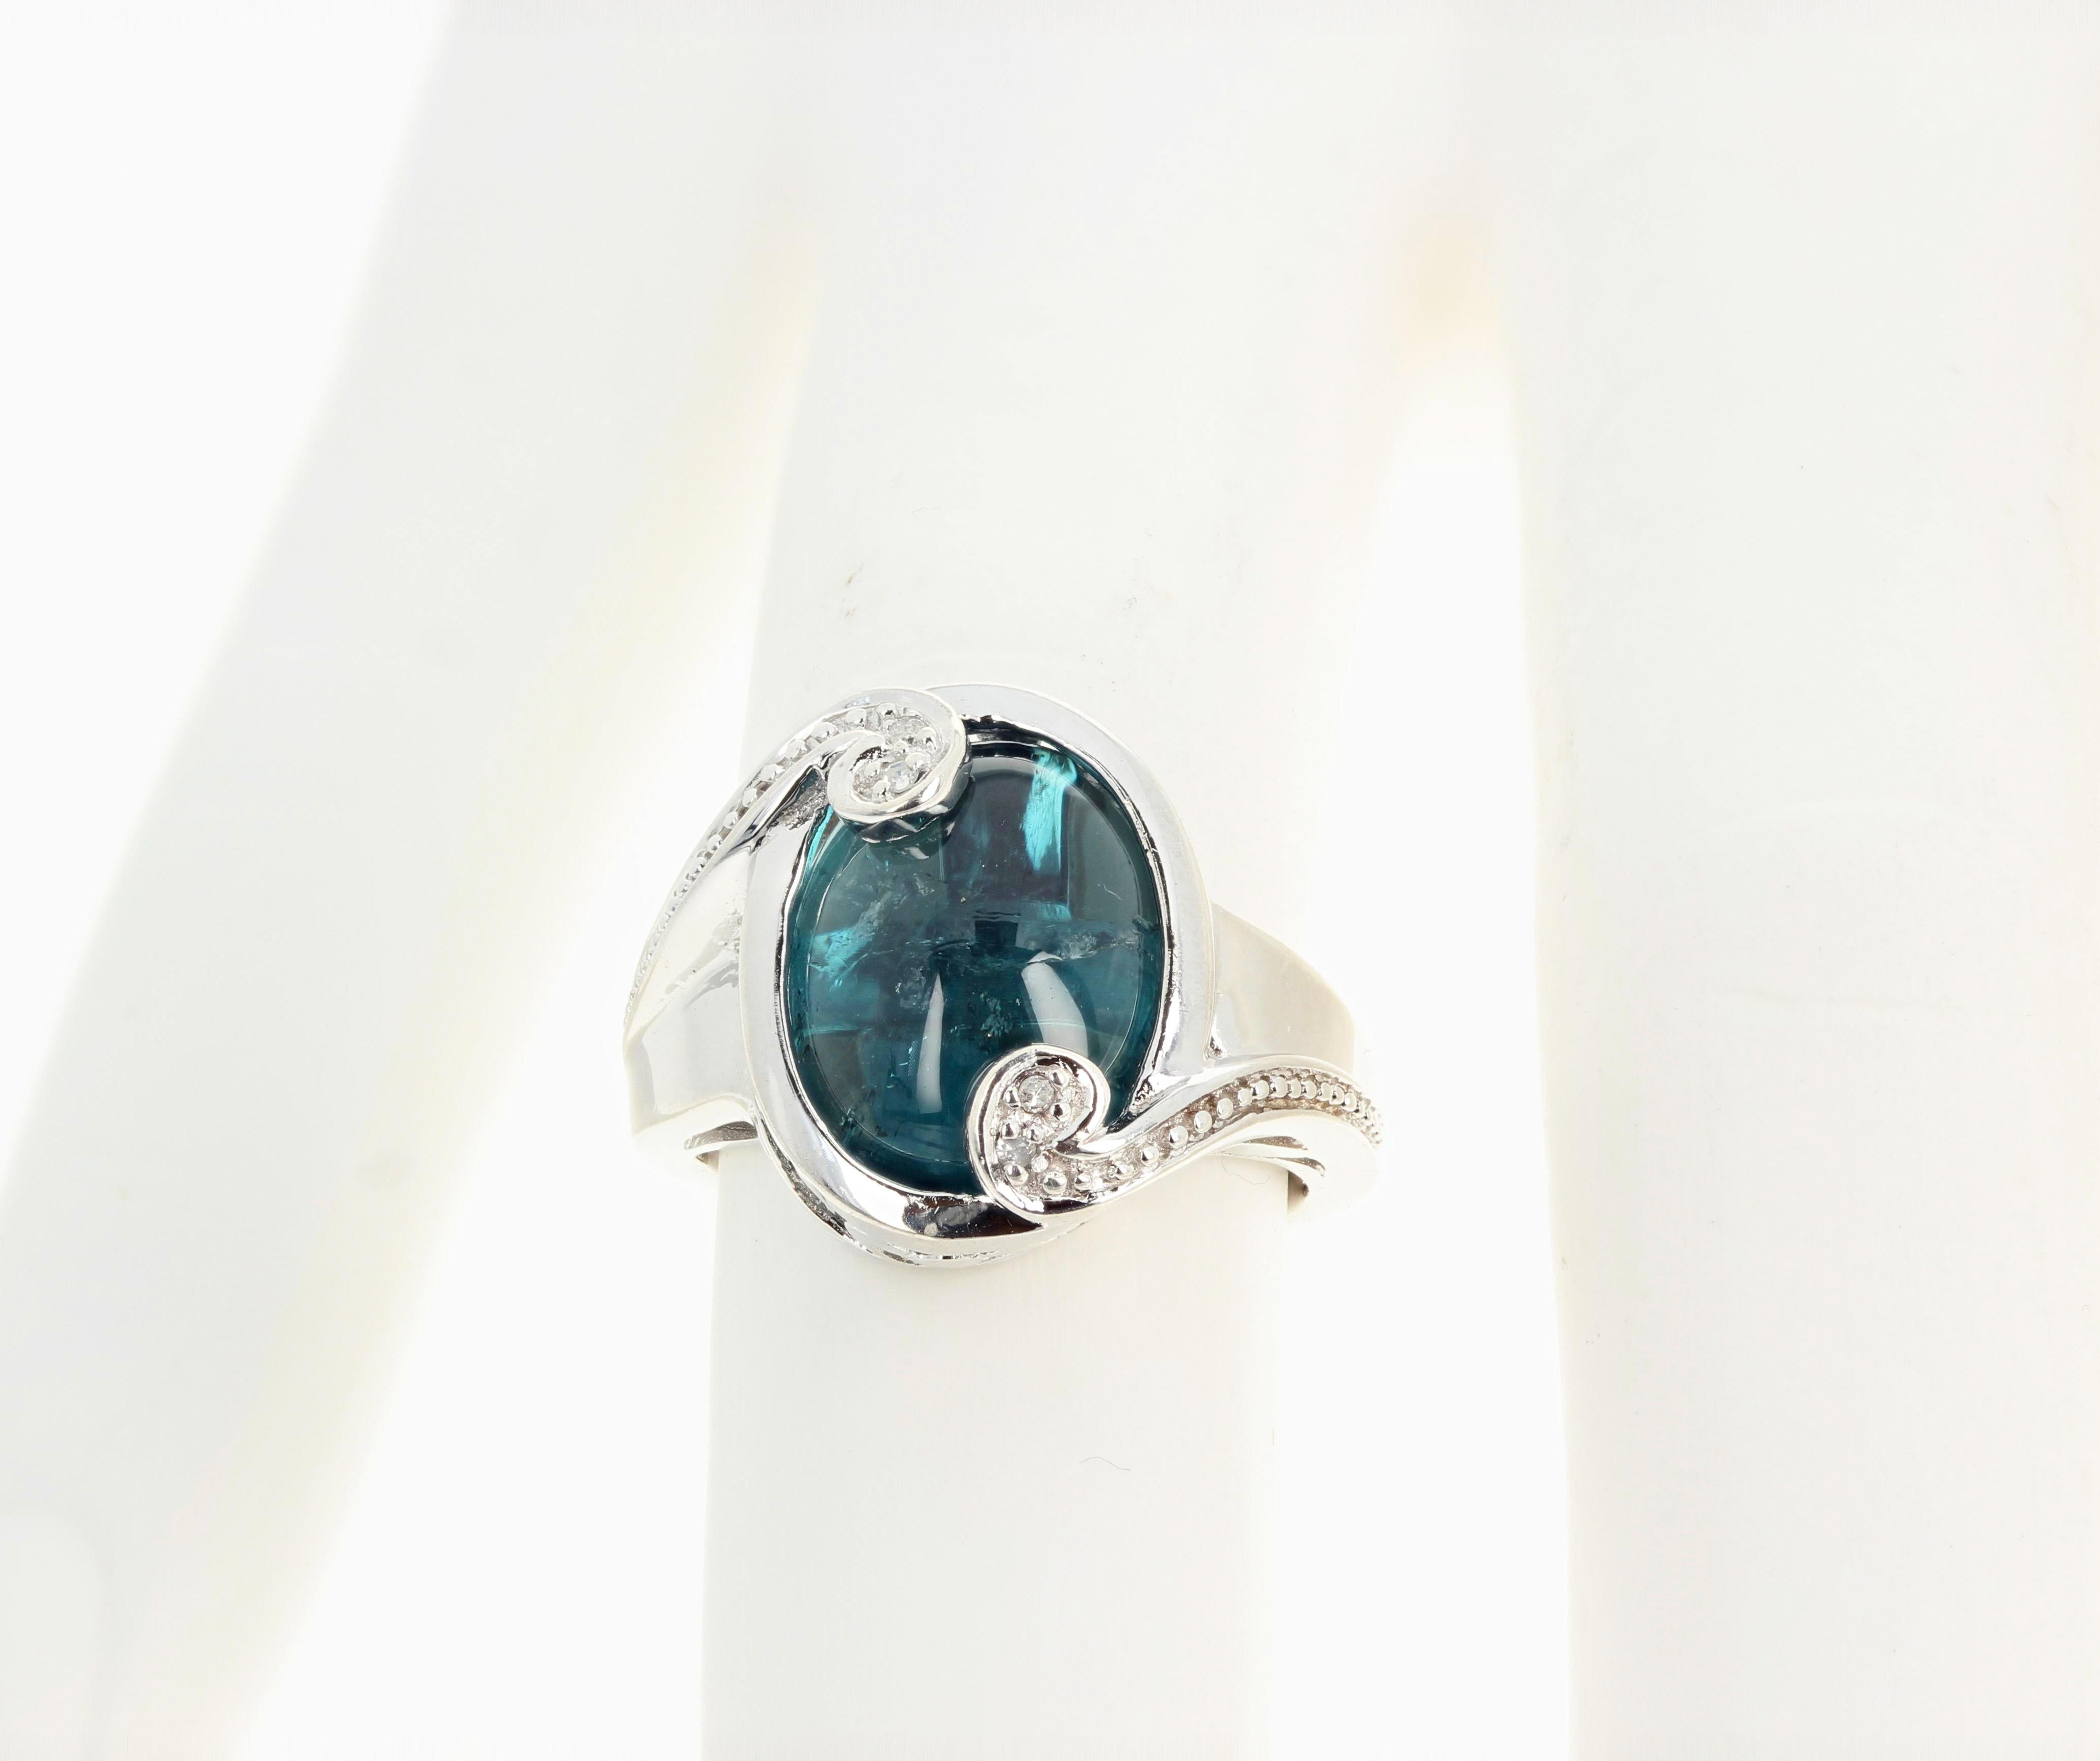 AJD Spectacular 6.38 Cts Blue Indicolite Cabochon Tourmaline & Diamonds Ring In New Condition For Sale In Raleigh, NC